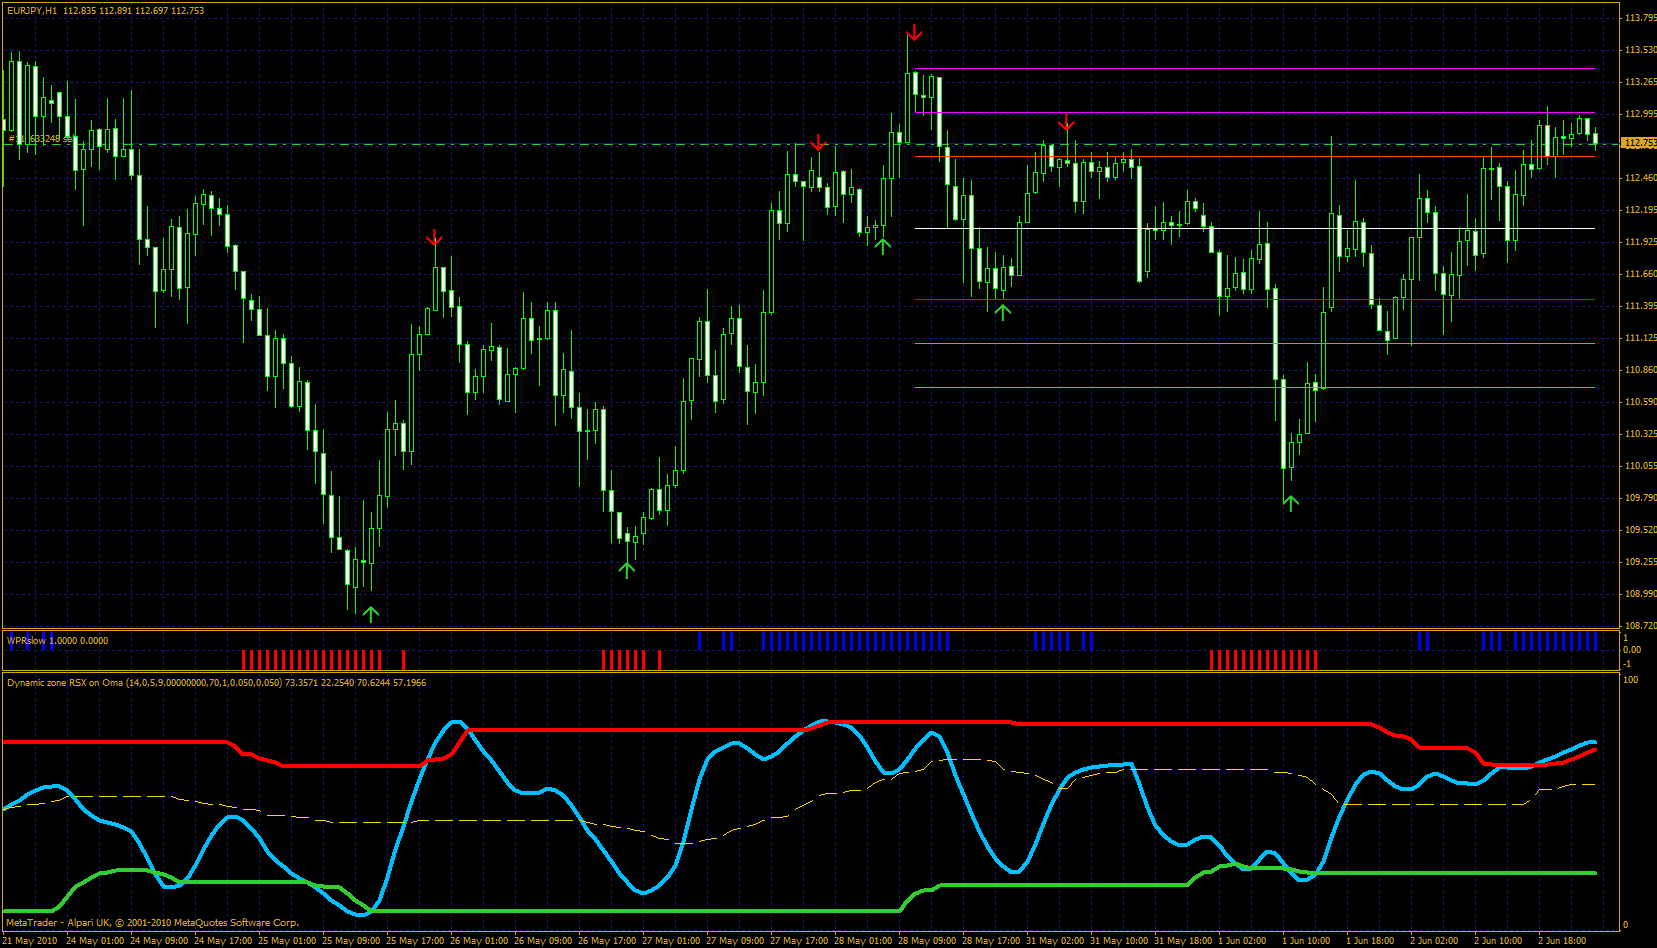 RSX - Indices - Trading Systems - MQL5 programming forum